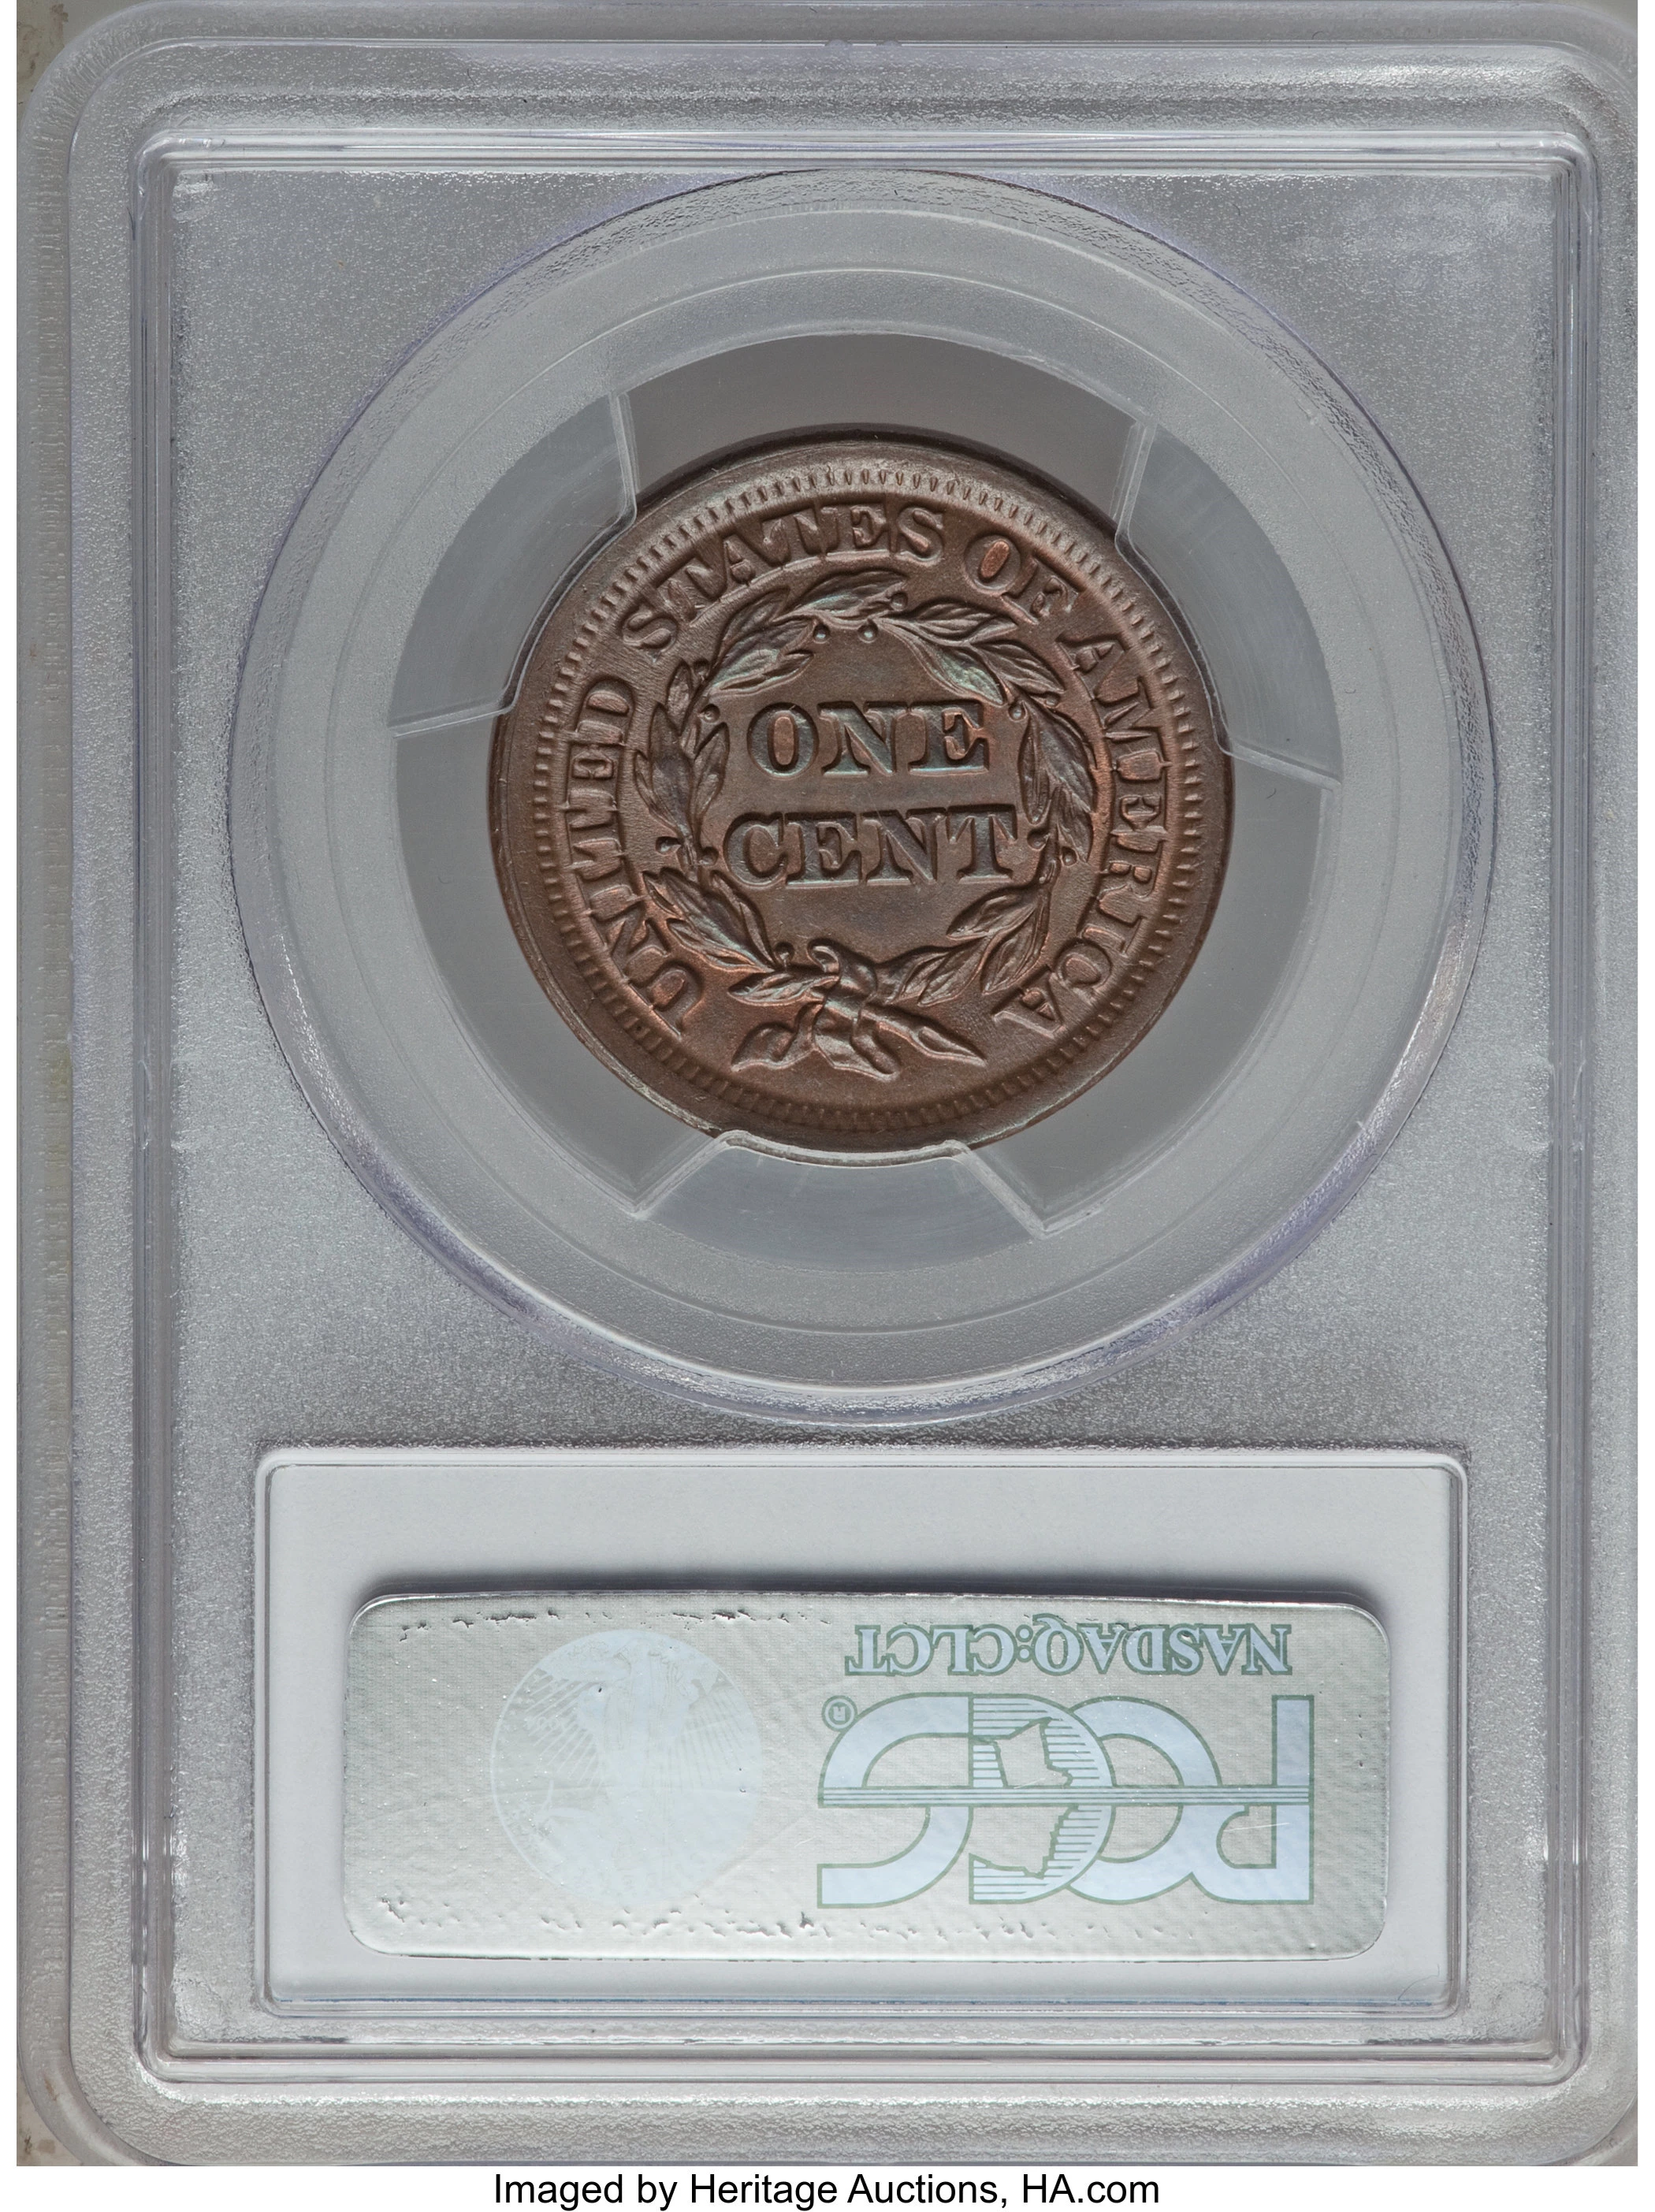 1853 Braided Hair Large Cent // NGC Certified MS63BN // Deluxe Collector's  Pouch - Olevian Numismatic Rarities - Touch of Modern